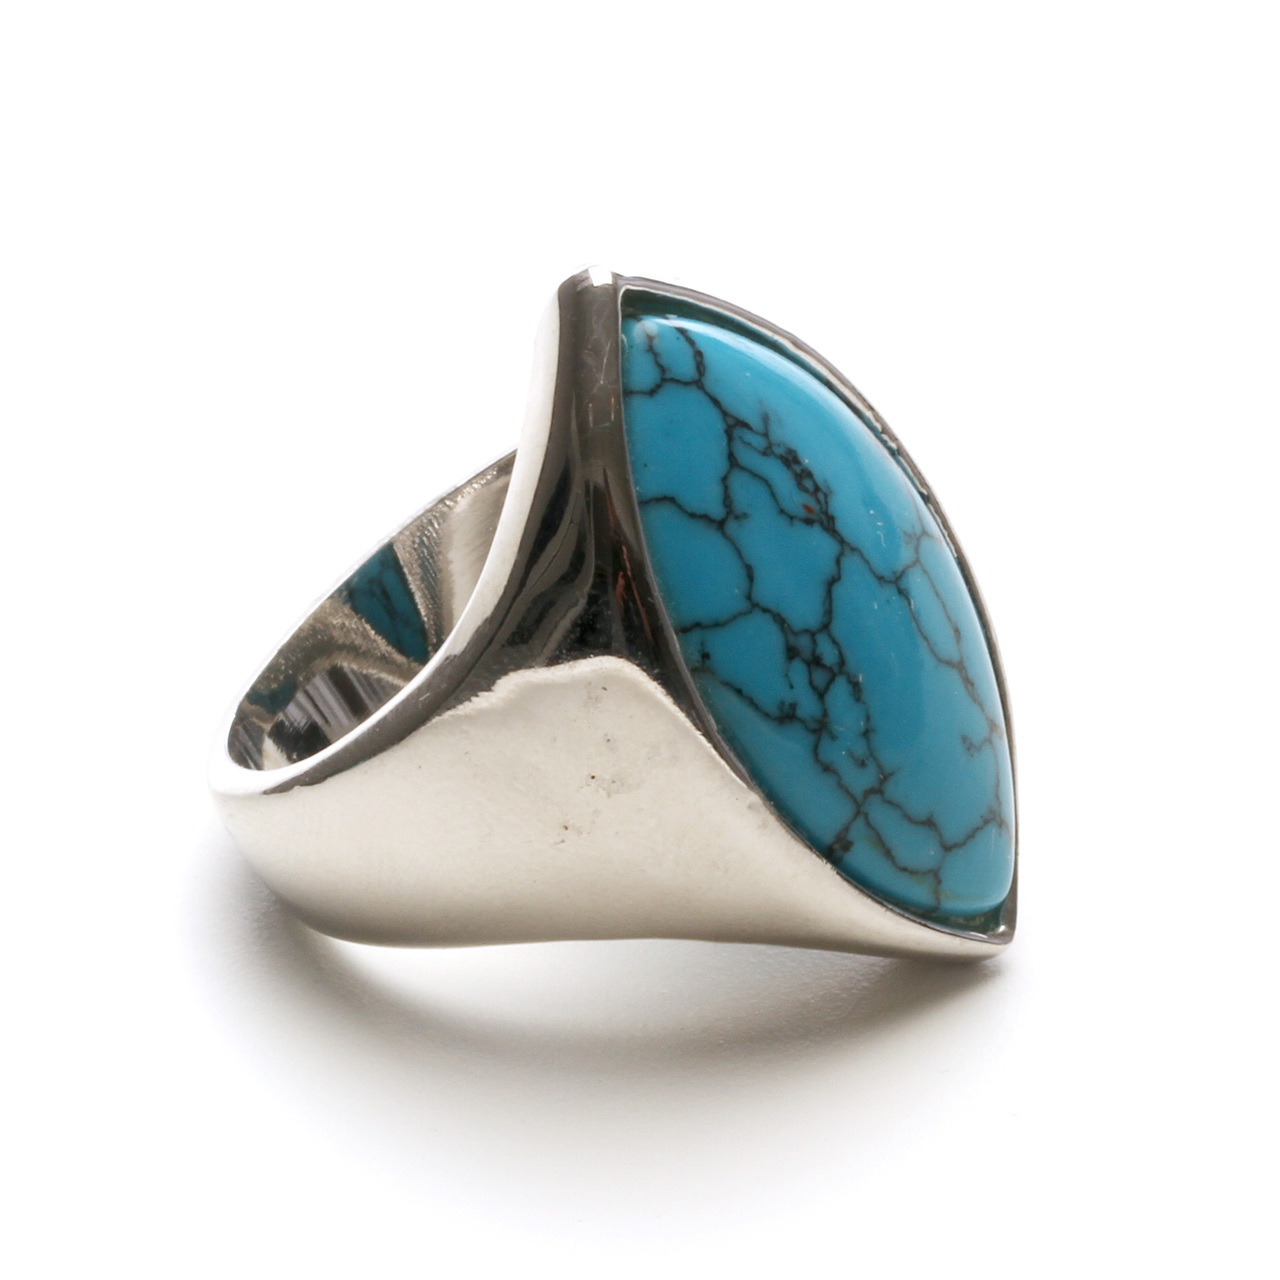 Peaceful Beauty Turquoise Ring